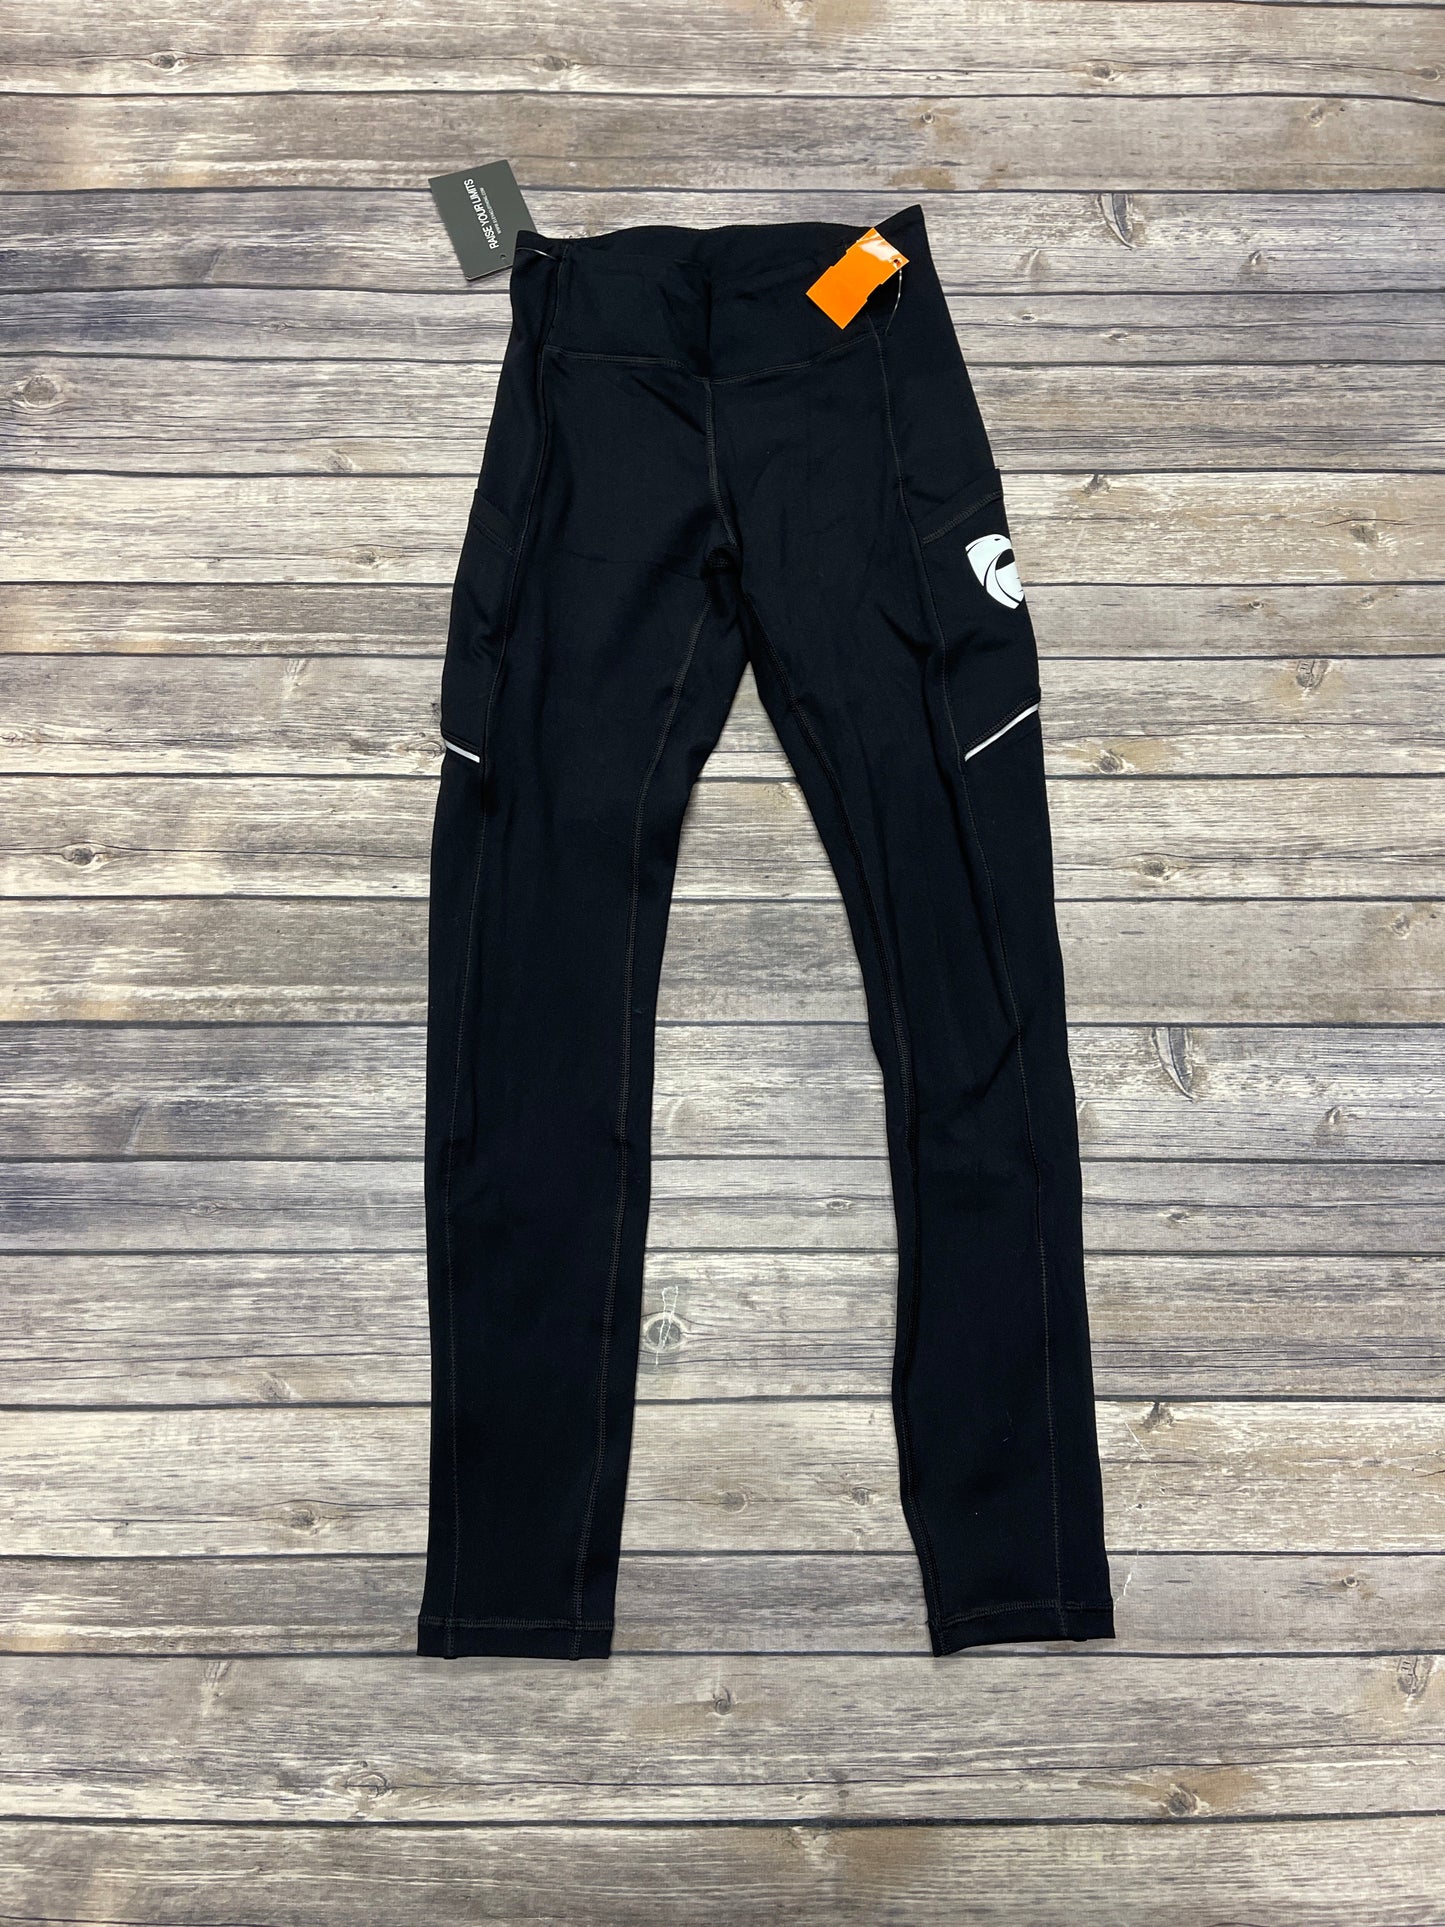 Athletic Leggings By Cme  Size: S